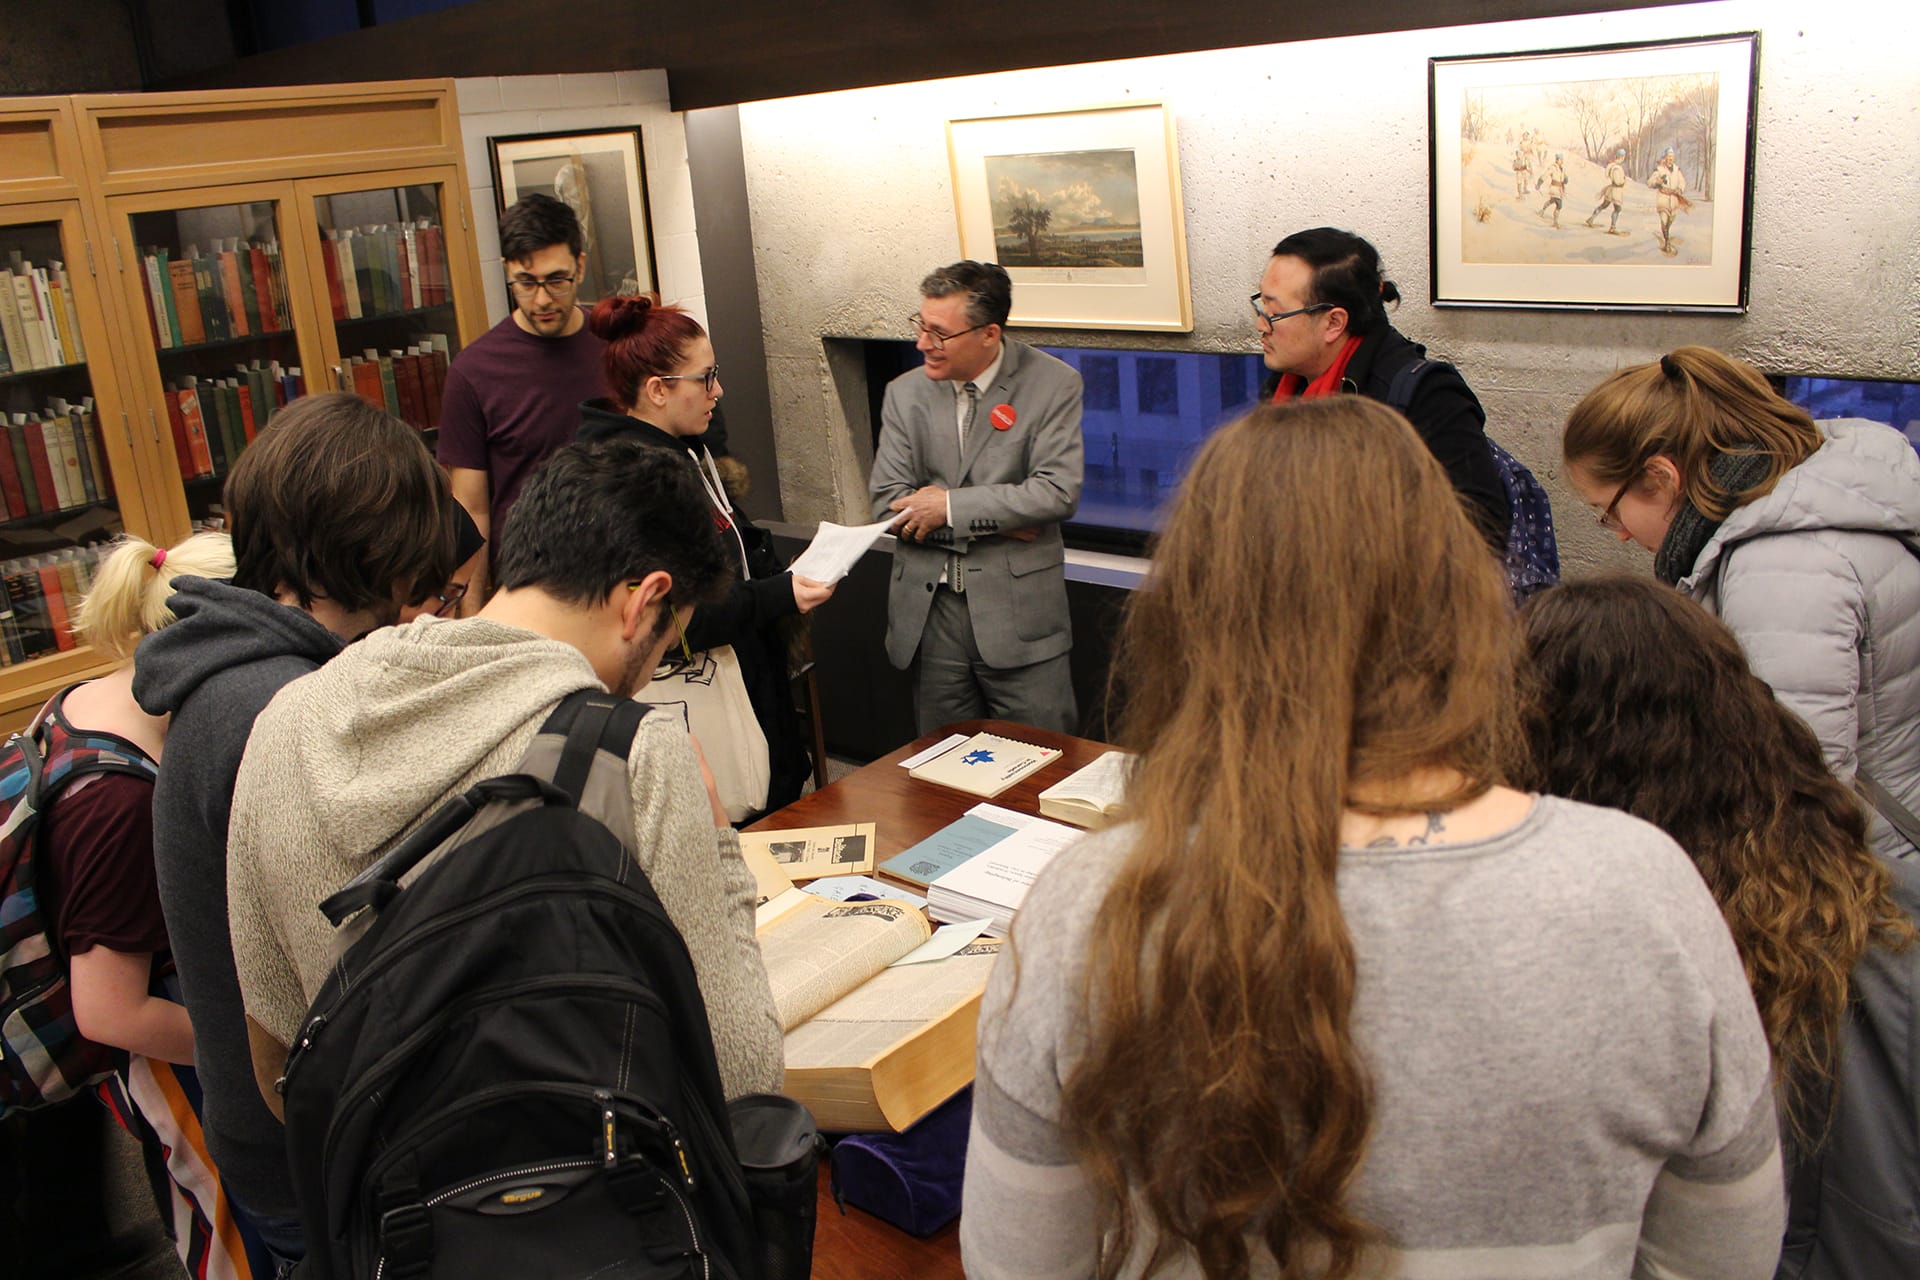 Event attendees examining archival and rare materials on display for the evening.